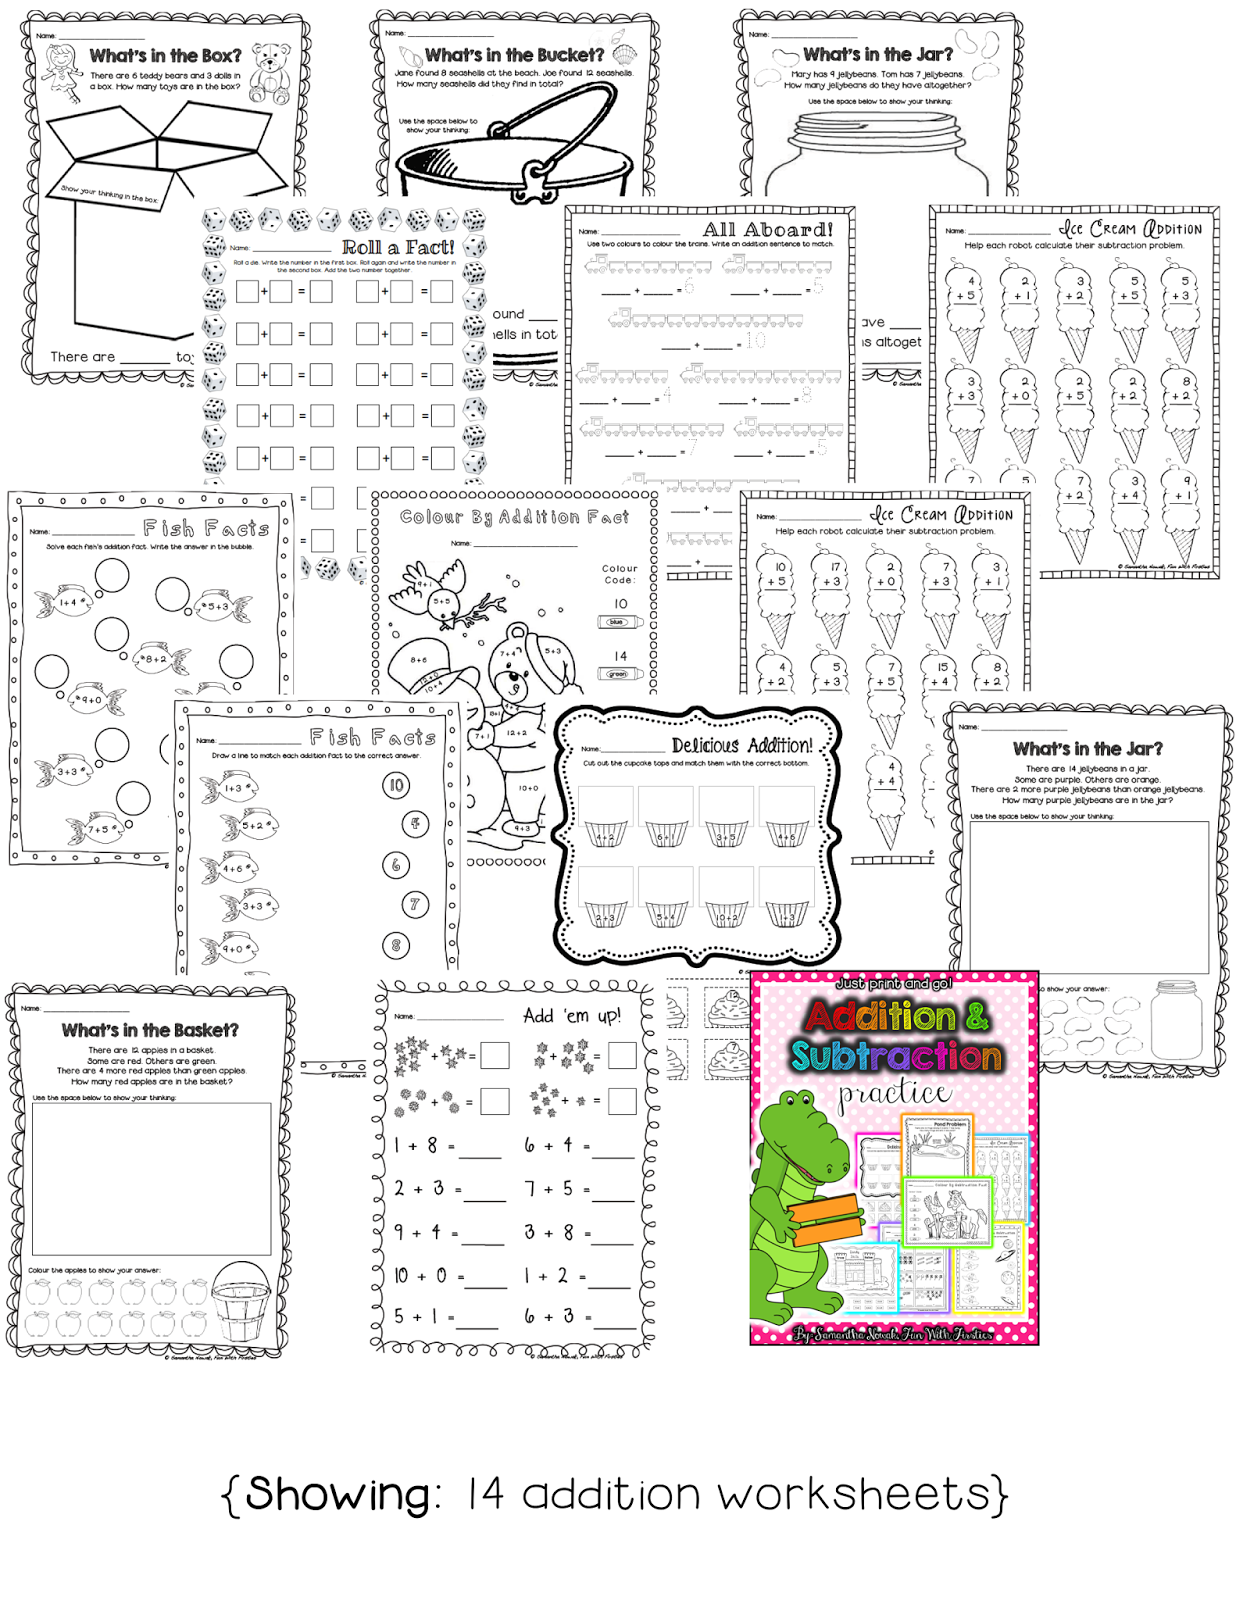 Fun With Firsties: FREE Addition Math Station Worksheet & Noise Level Management